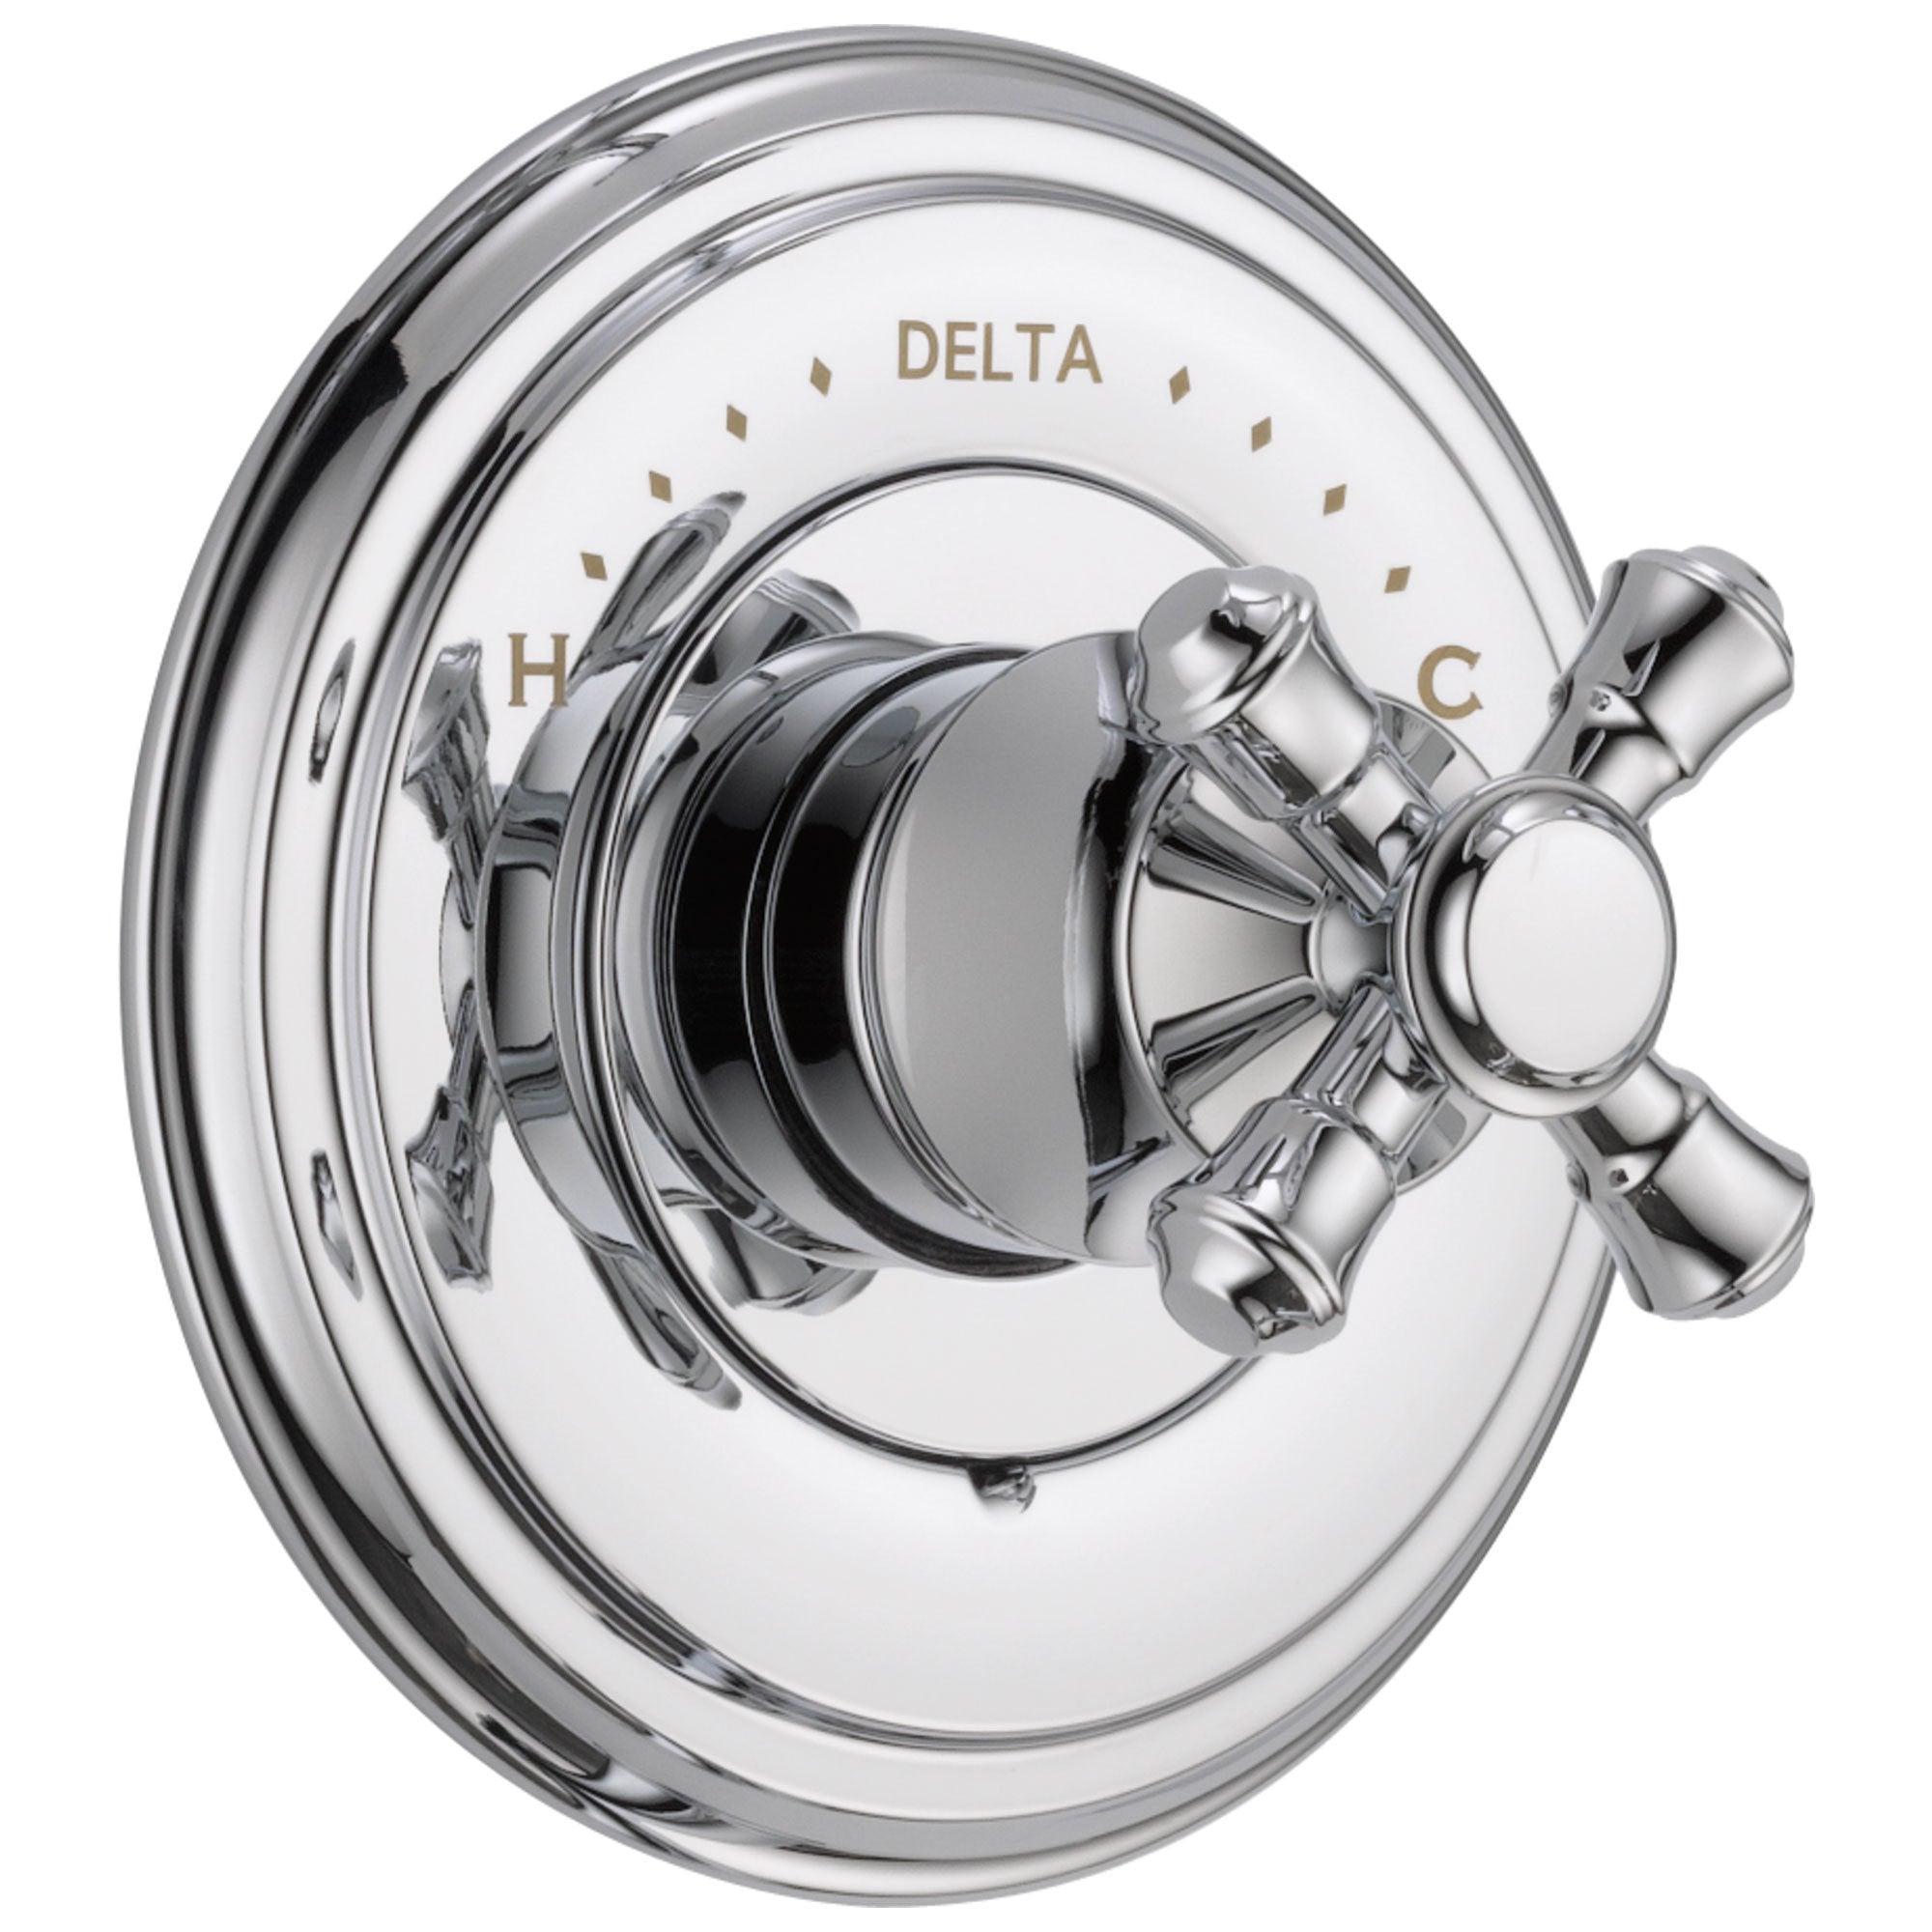 Delta Cassidy Collection Chrome Finish Monitor 14 Series Shower Faucet Control COMPLETE ITEM with Single Cross Handle and Rough-in Valve without Stops D1598V